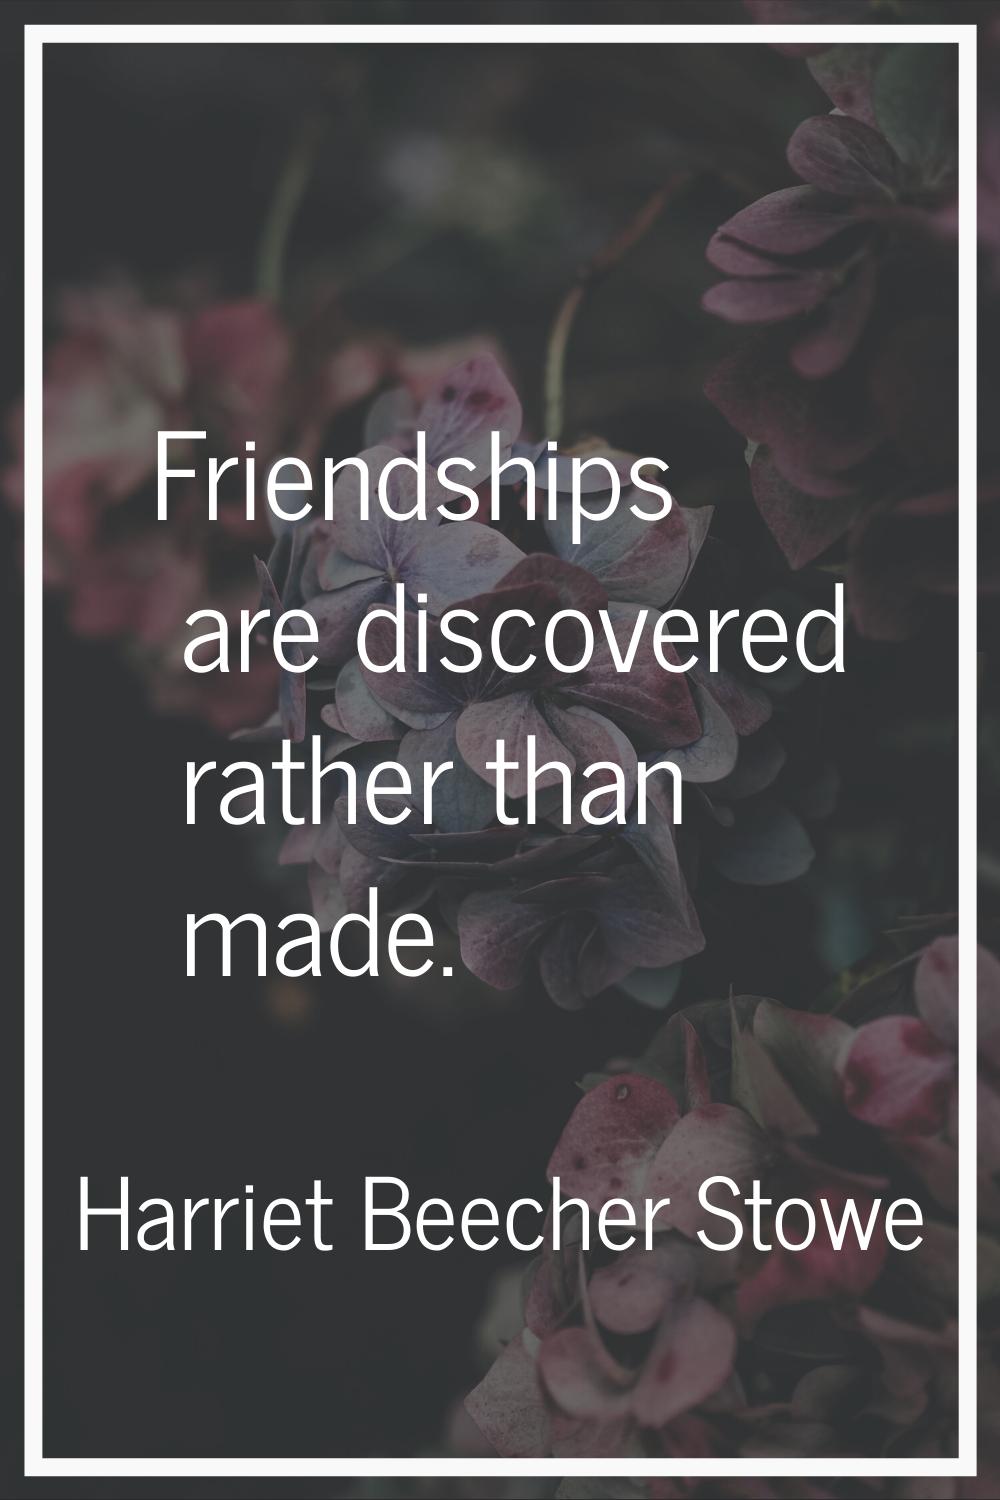 Friendships are discovered rather than made.